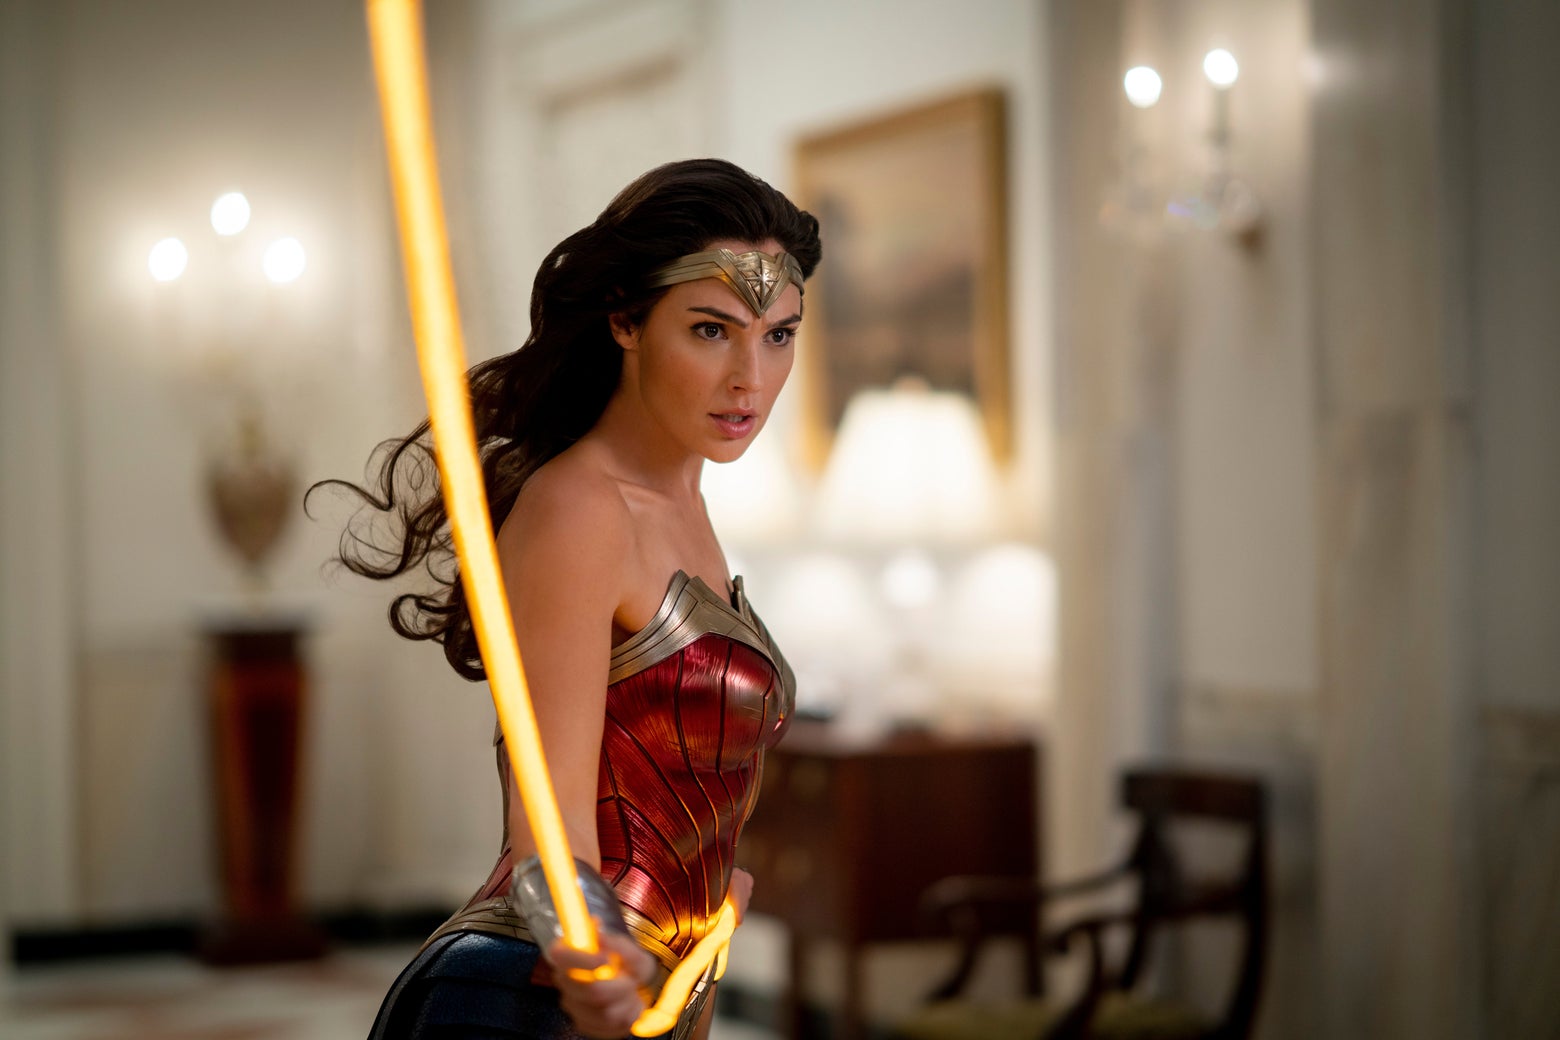 Wonder Woman 1984 cast and characters – Who's Who?